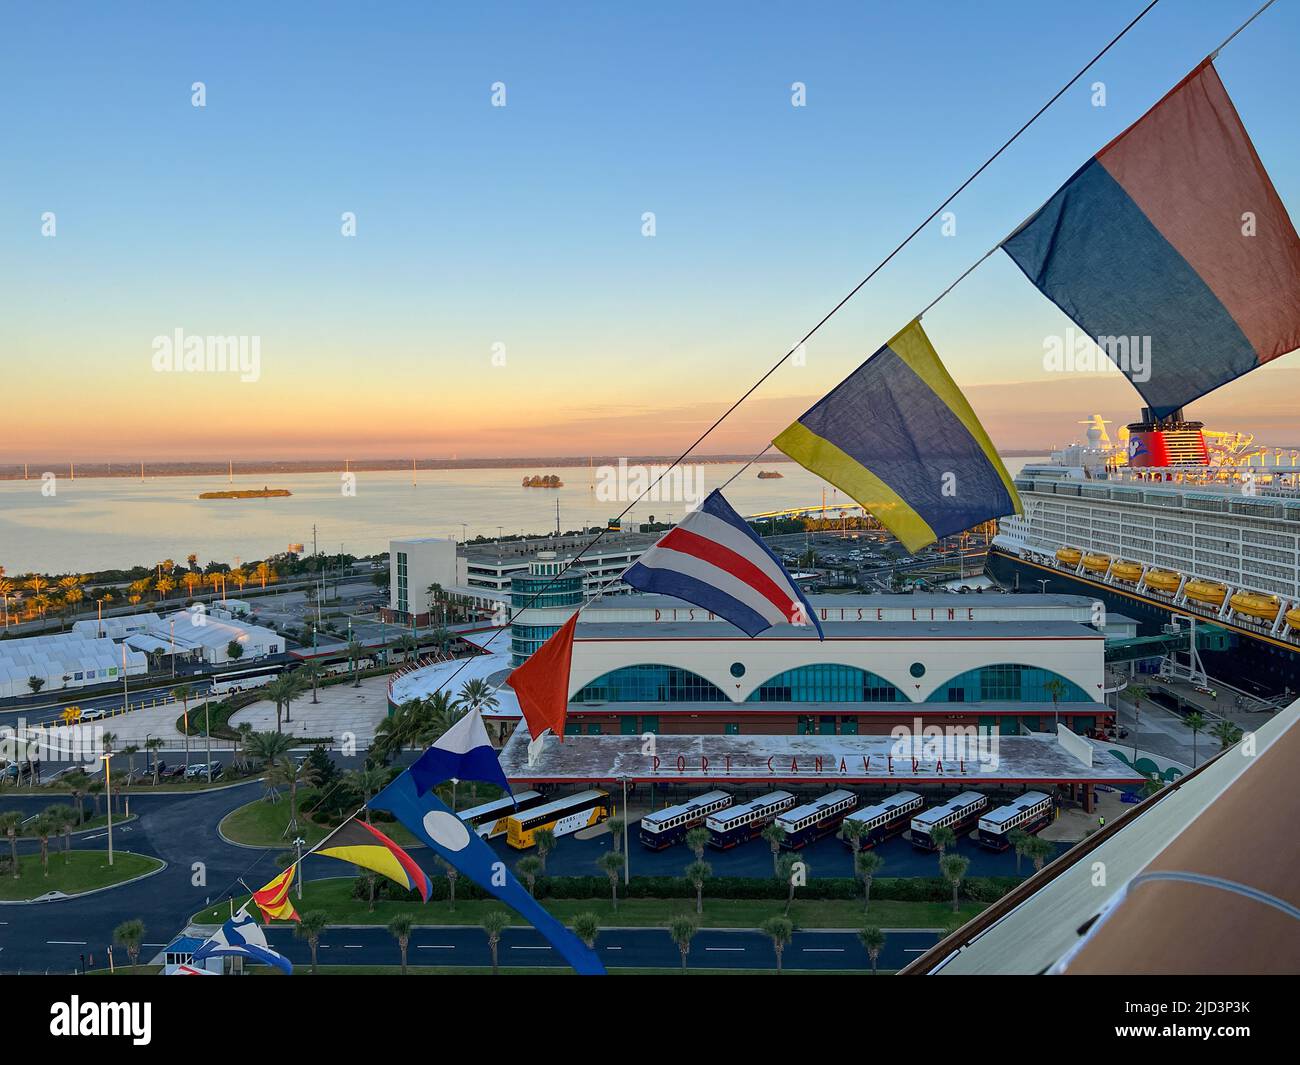 Orlando, FL USA - January 8, 2022: An aerial view of  Port Canaveral in Florida with cruise ship flags waving in the wind. Stock Photo